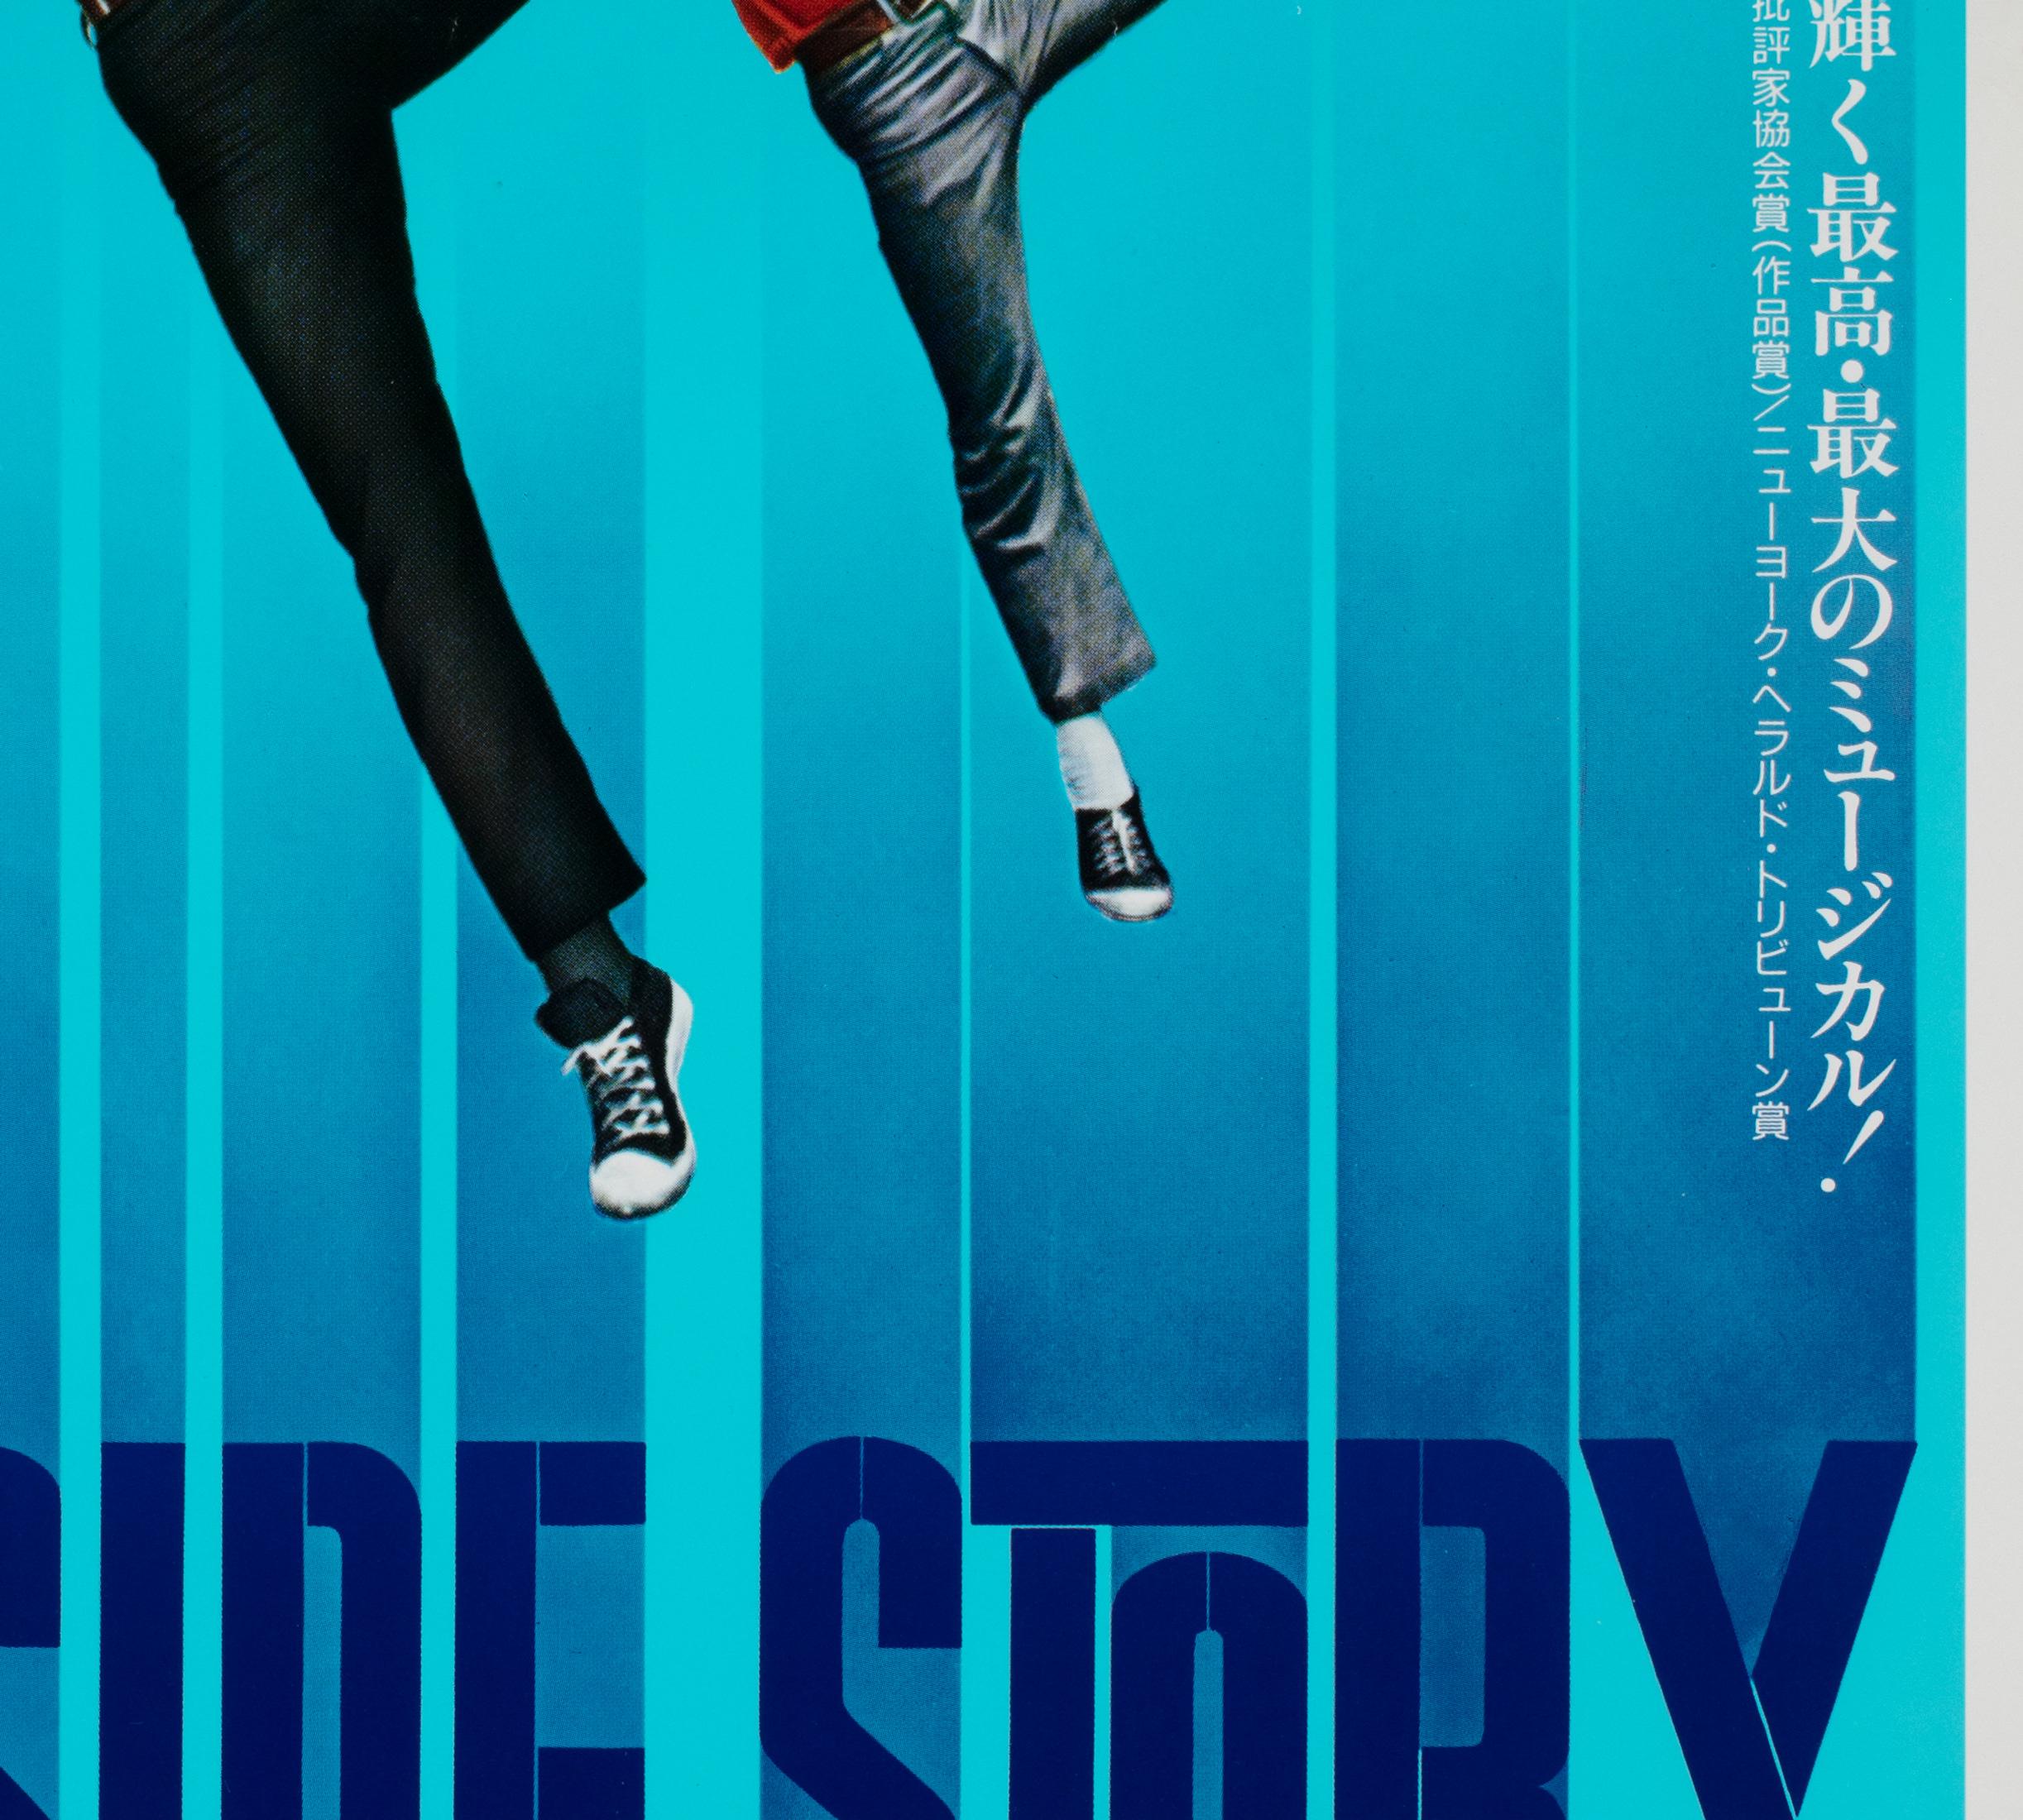 Paper West Side Story R1992 Japanese B2 Film Movie Poster